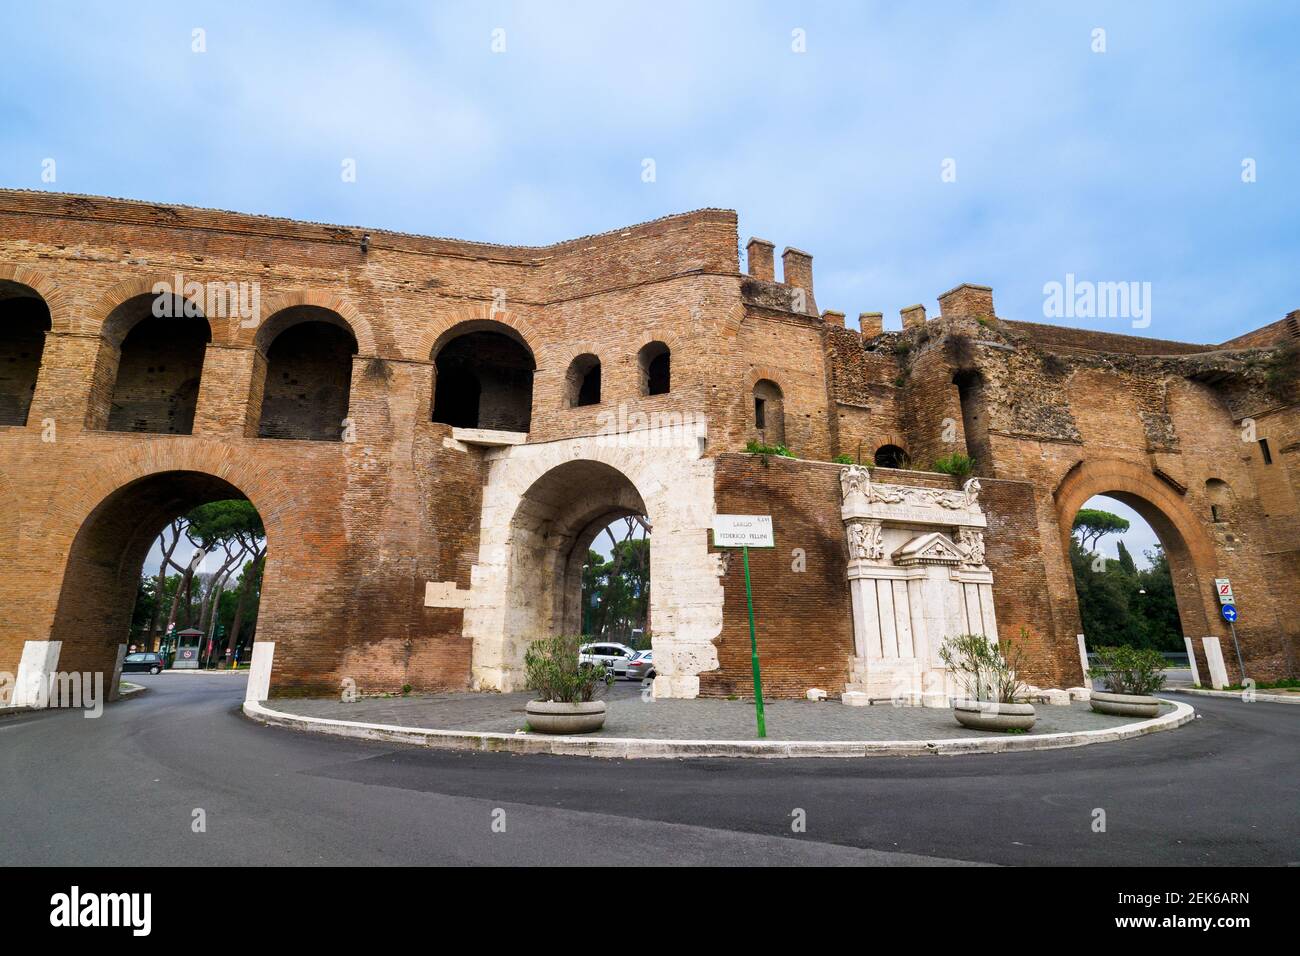 Internal view of Porta Pinciana, a gate of the Aurelian Walls in Rome. The name derives from the gens Pincia, who owned the eponymous hill (Pincian Hill) - Rome, Italy Stock Photo